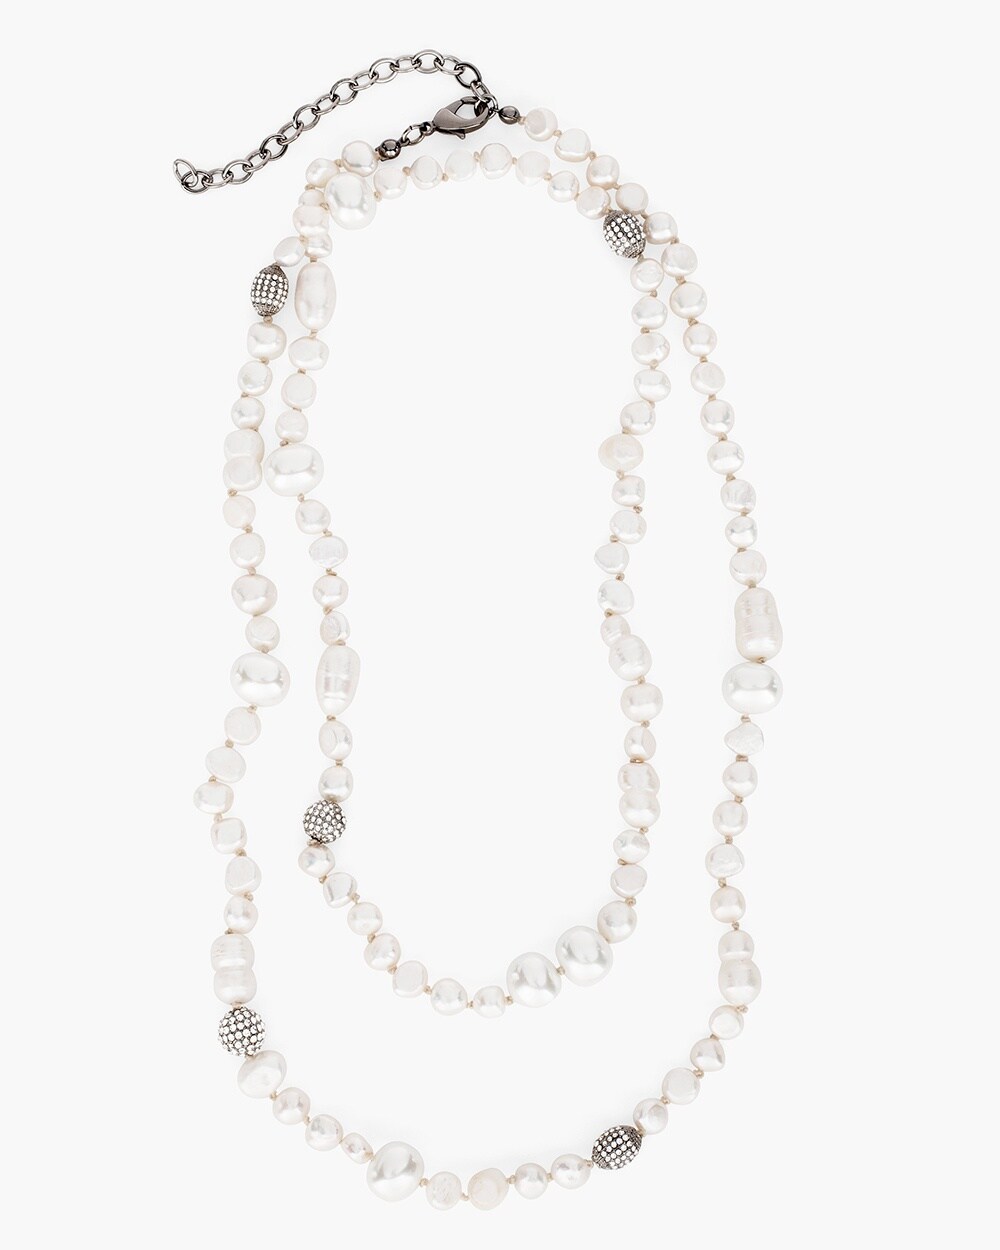 The Collectibles Kyoto Single-Strand Necklace